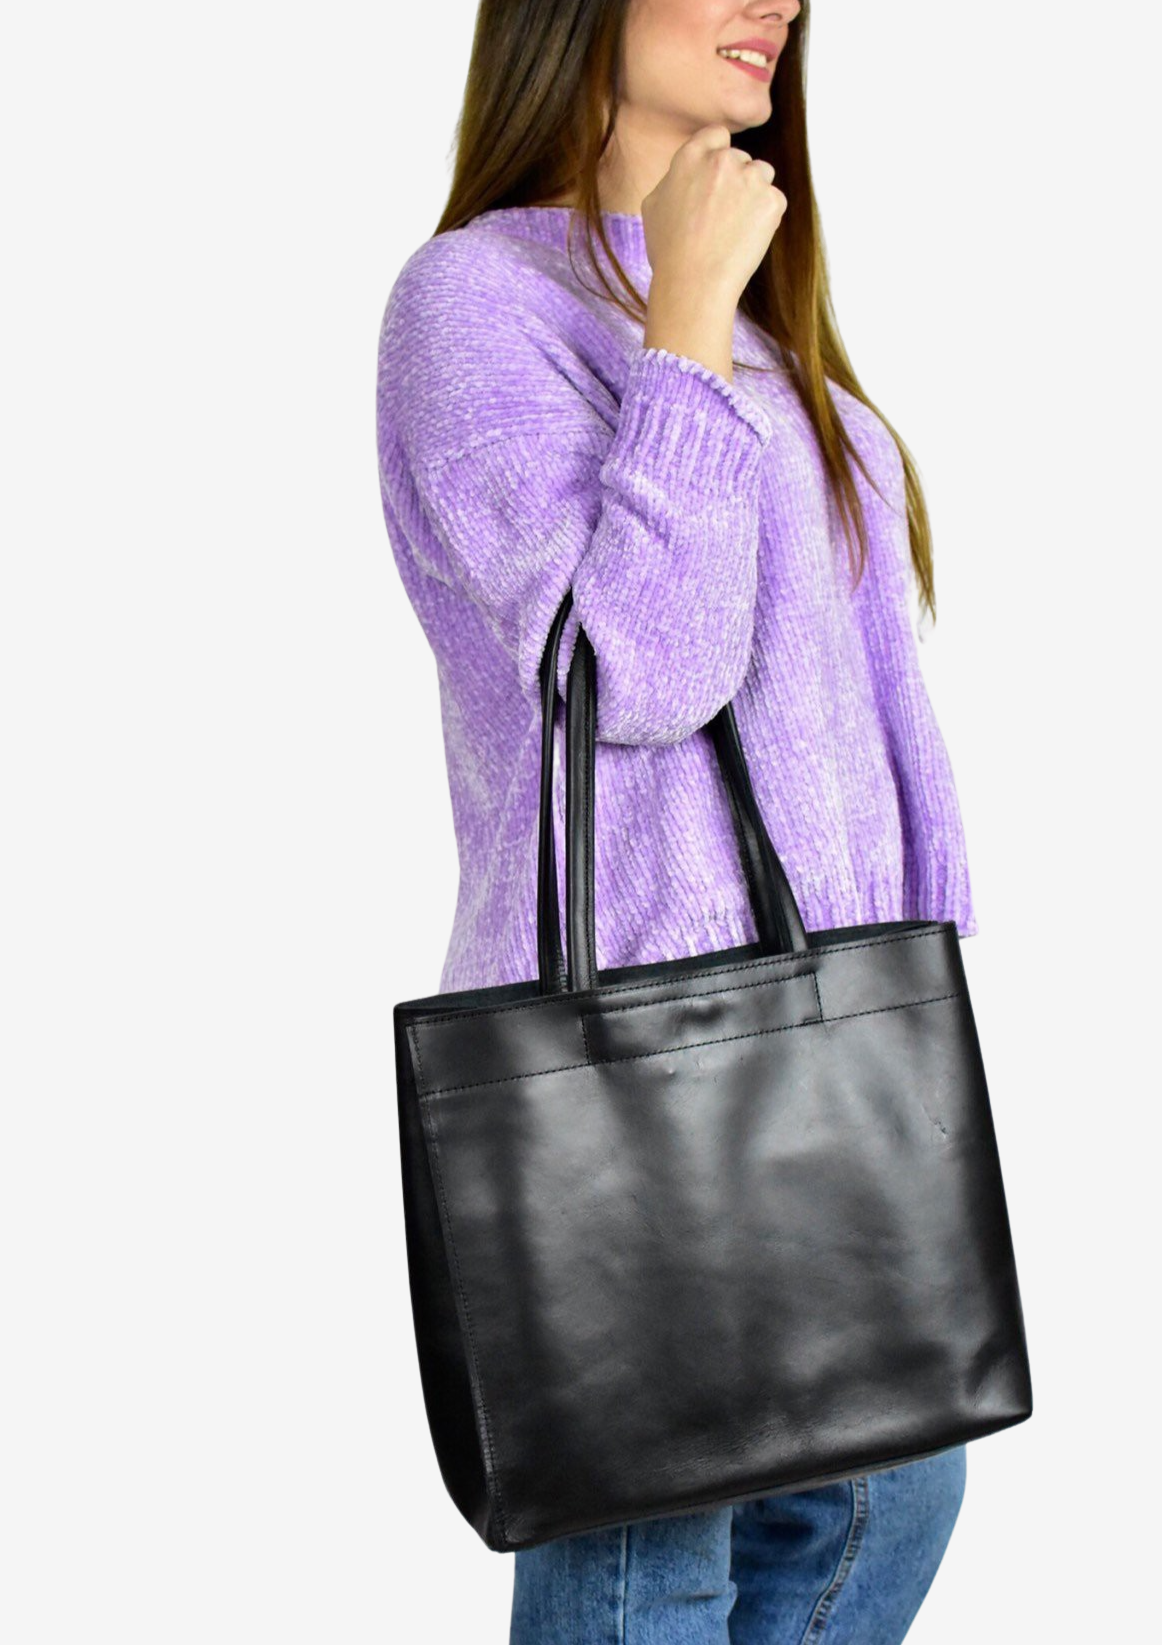 handmade leather shoulder bags for women